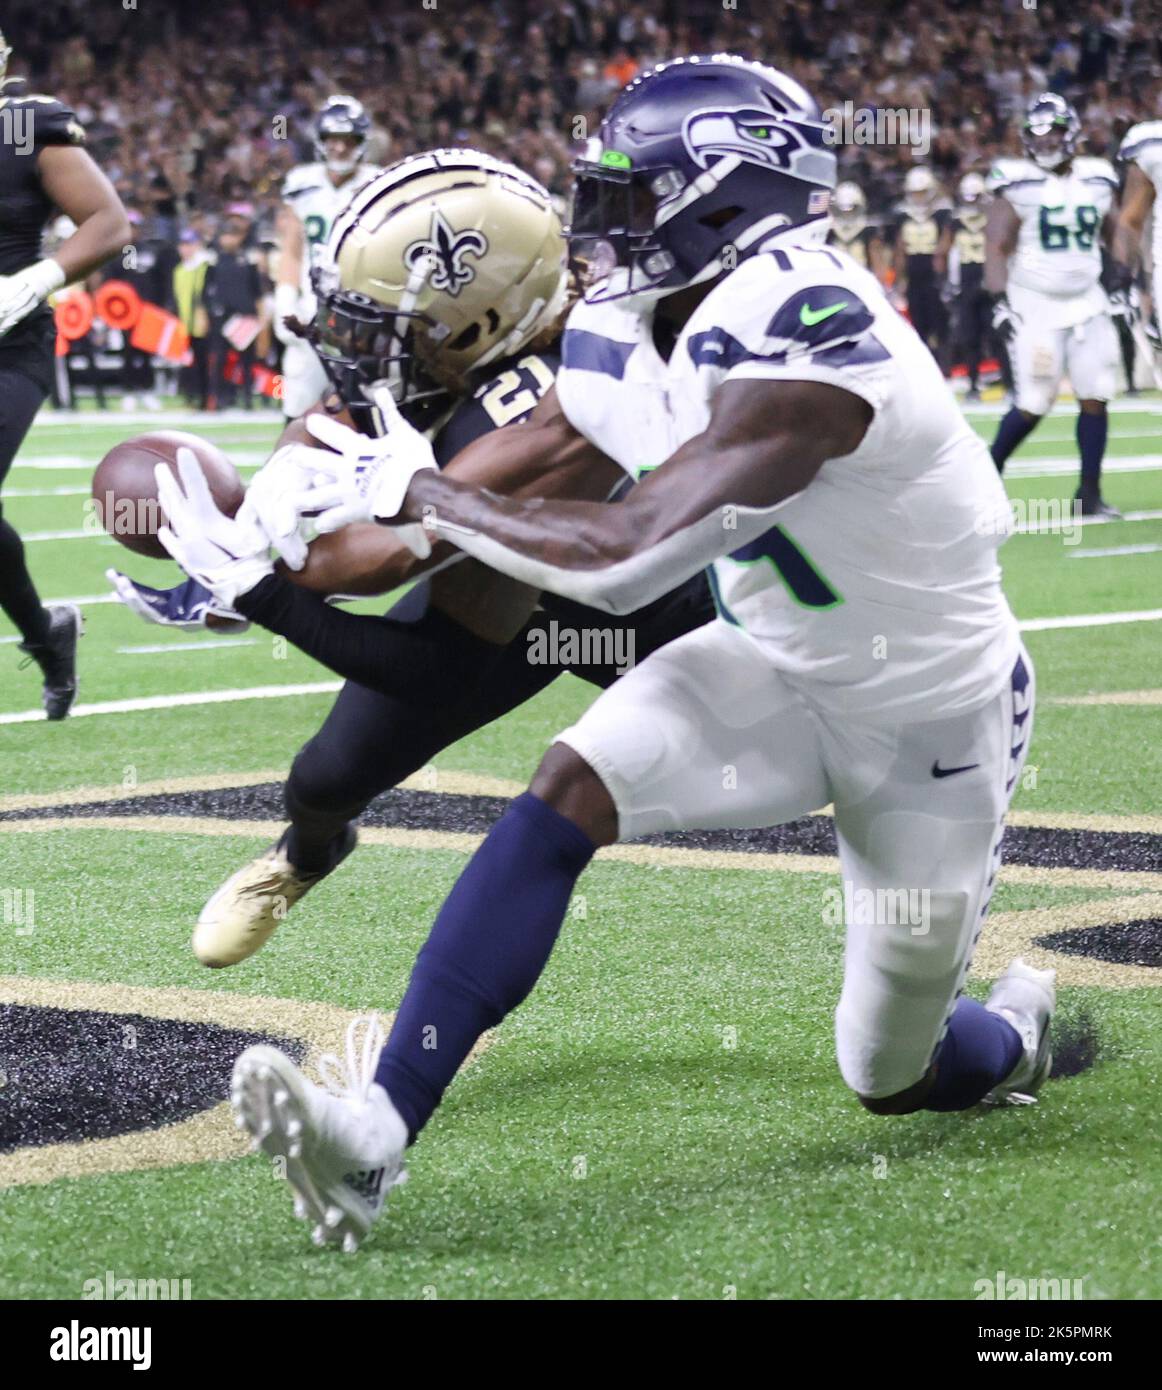 New Orleans, USA. 09th Oct, 2022. New Orleans Saints cornerback Bradley Roby (21) breaks up a two-point conversion pass that was intended for Seattle Seahawks wide receiver D.K. Metcalf (14) in the fourth quarter during a National Football League contest at the Caesars Superdome in New Orleans, Louisiana on Sunday, October 9, 2022. (Photo by Peter G. Forest/Sipa USA) Credit: Sipa USA/Alamy Live News Stock Photo